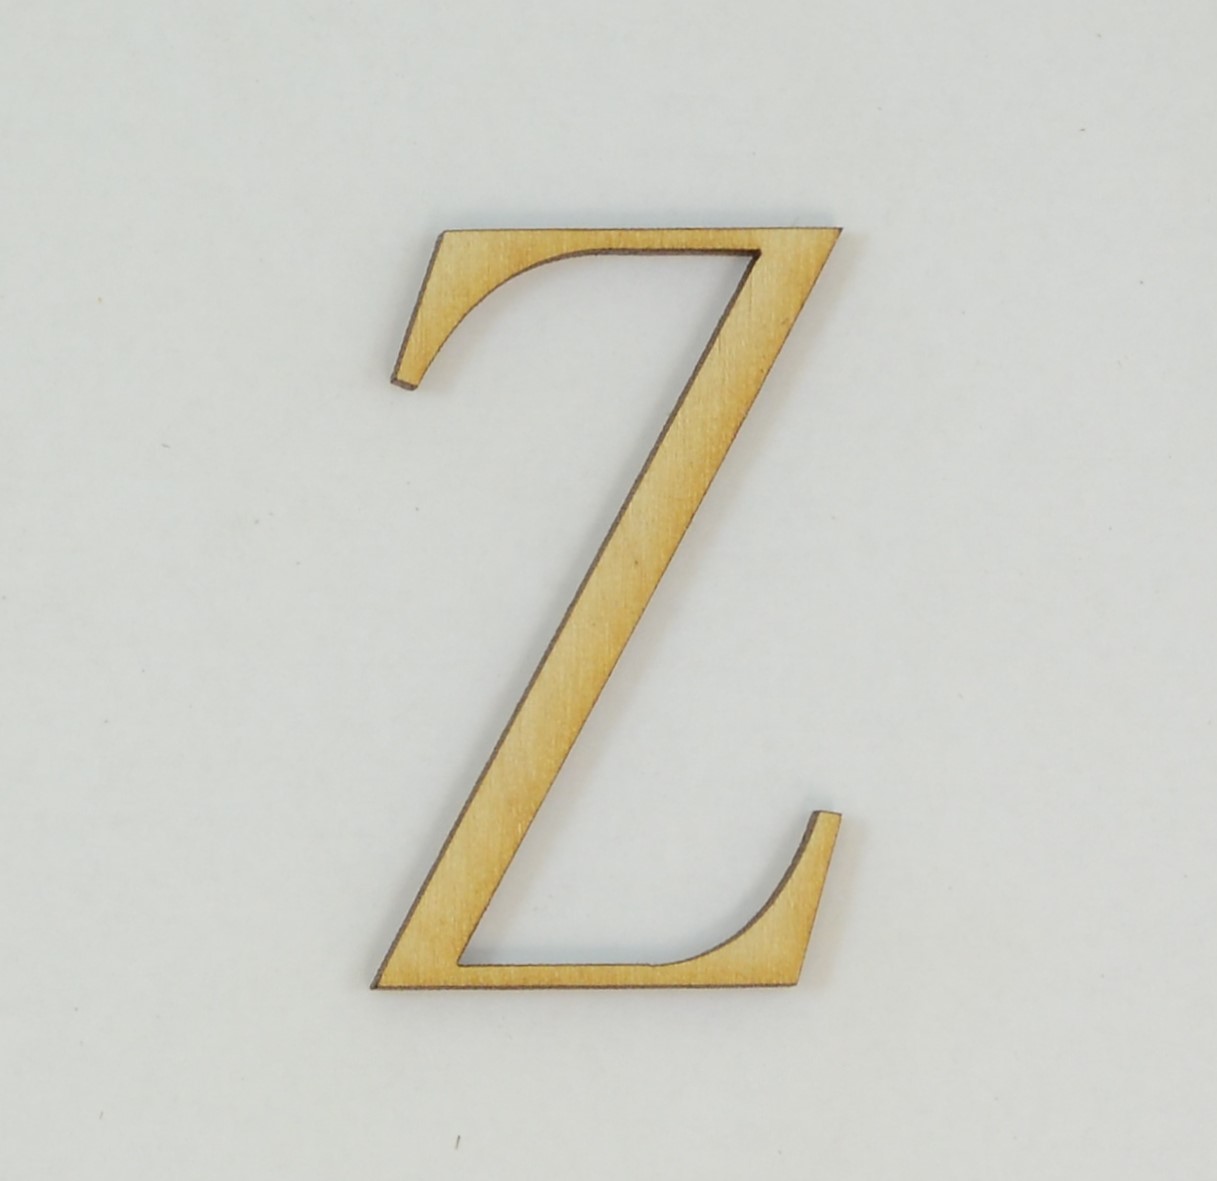 1 Pc, 8 Inch X 1/8 Inch Thick Fangsong Font Wood Letters Z For Direction Use Or Decor - image 1 of 3